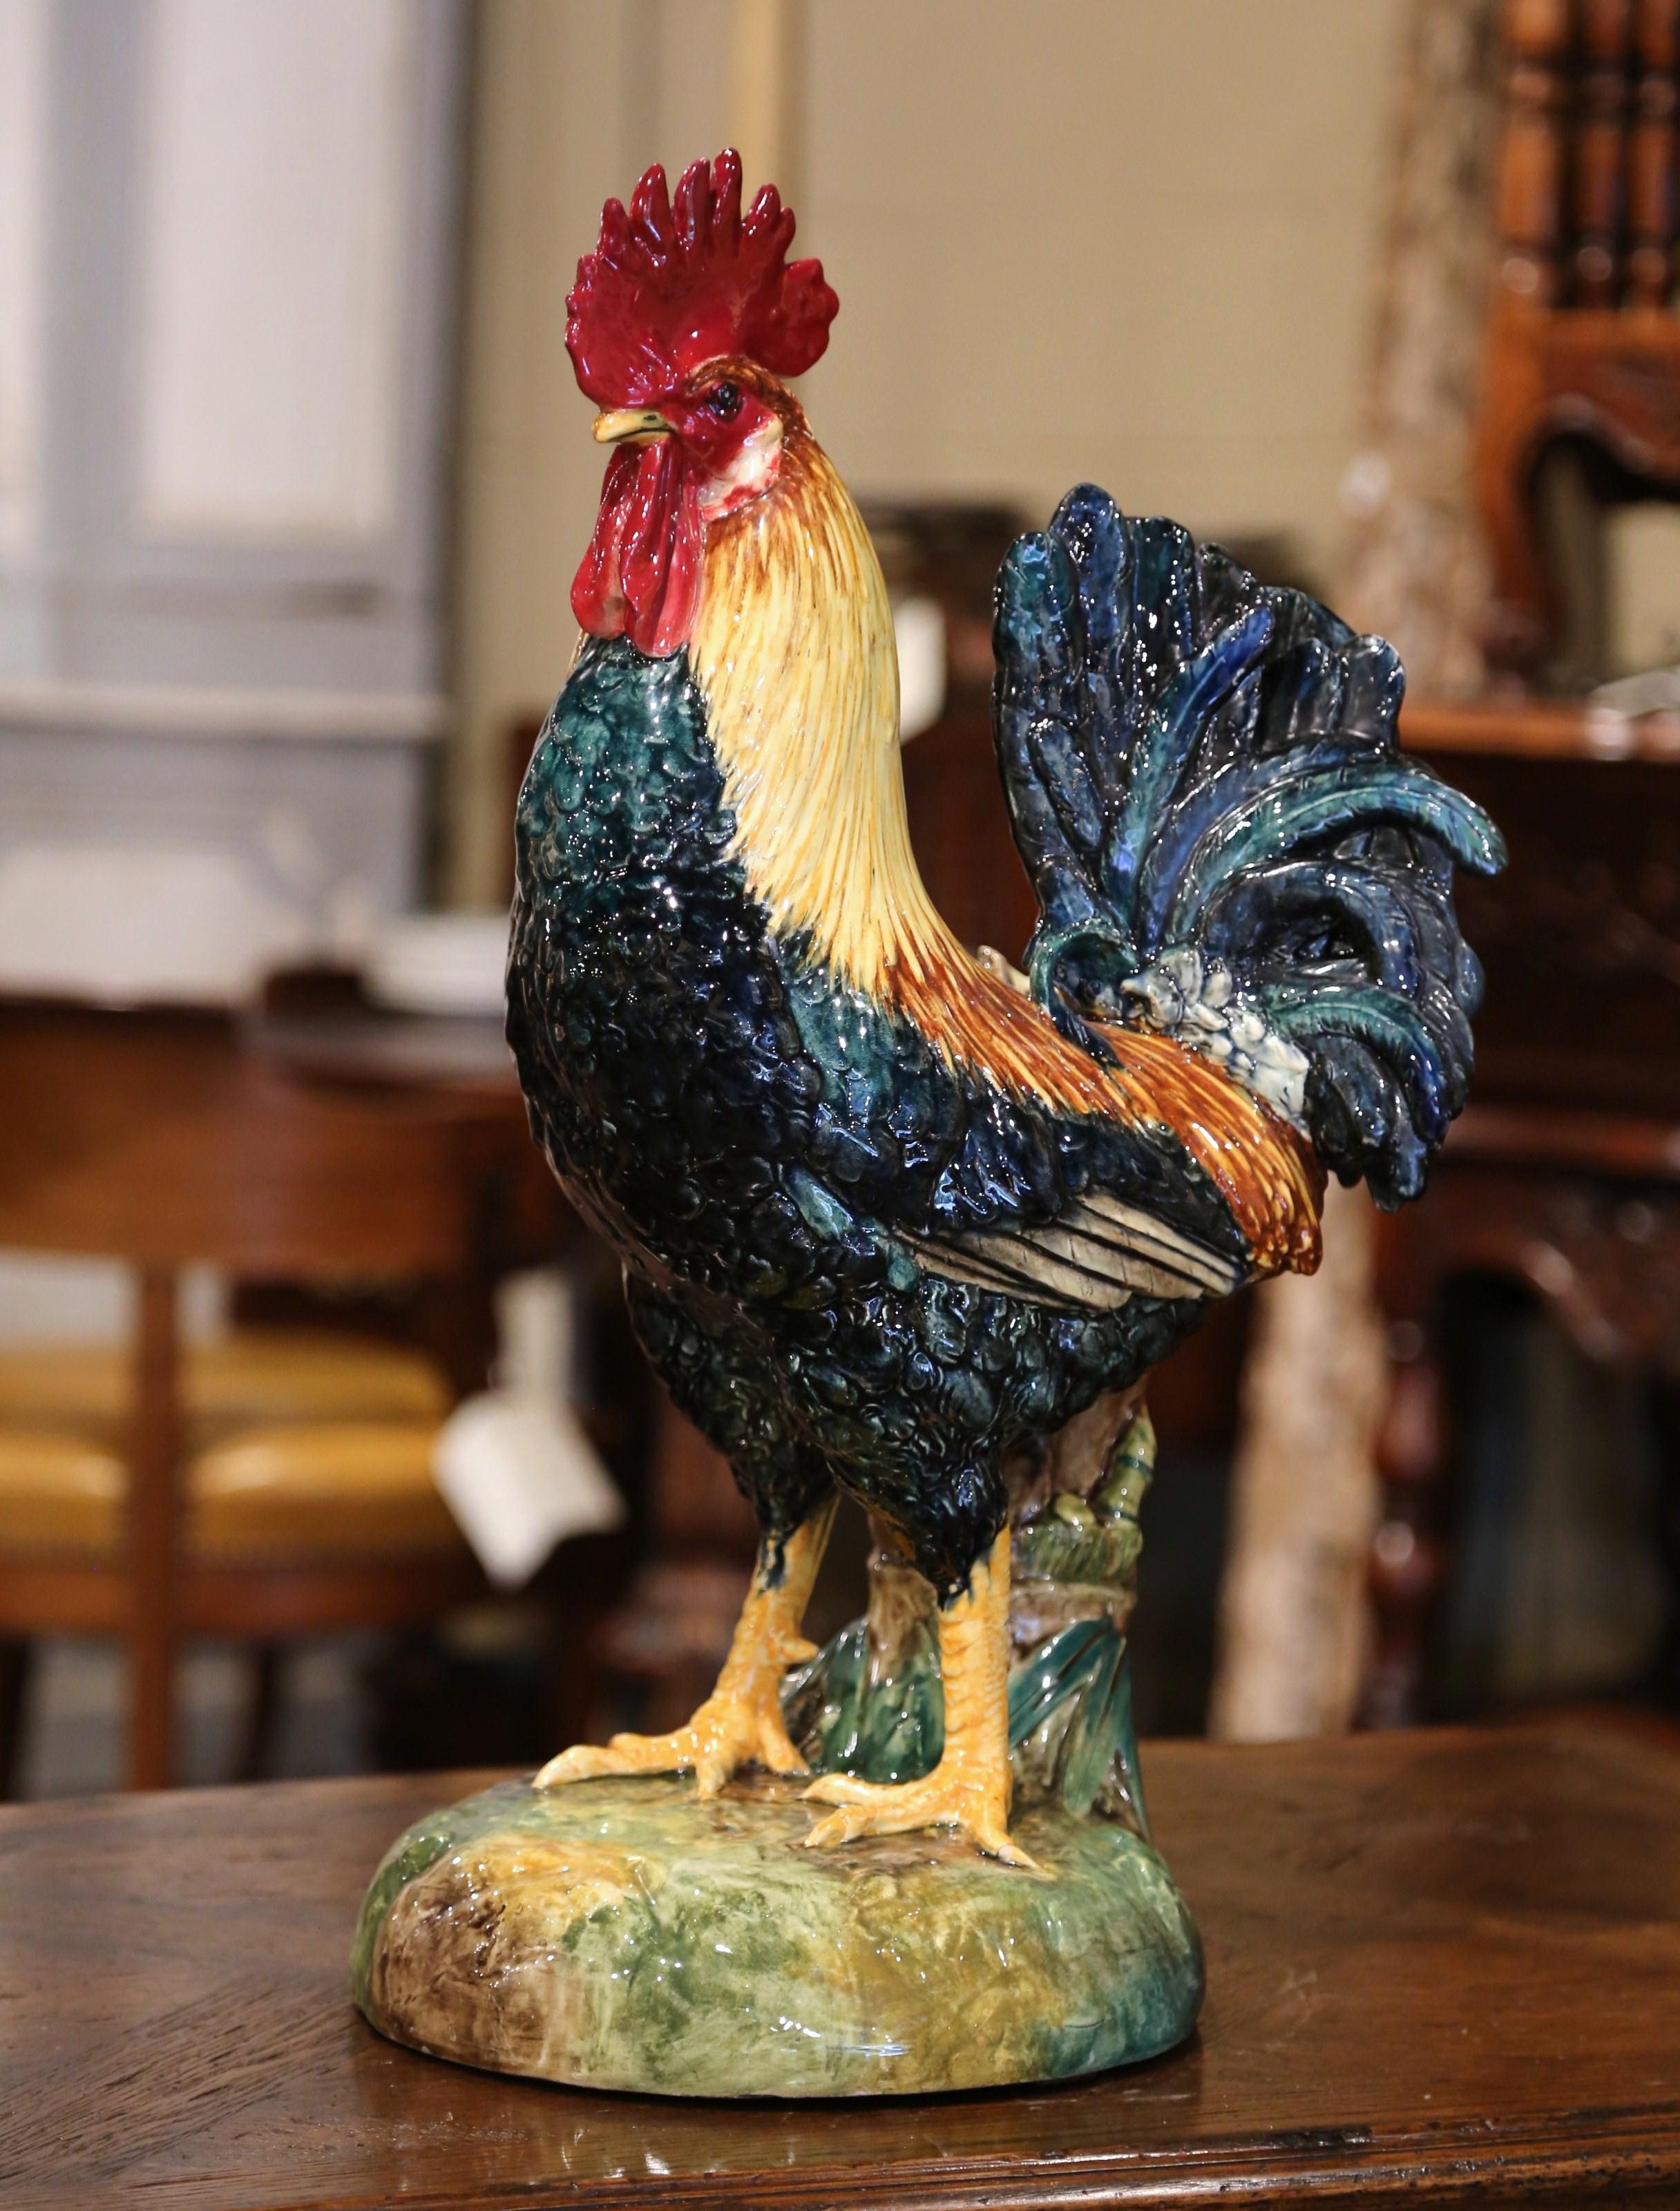 Bring the country French style into your home with this large, colorful, antique rooster figure with side vase. Crafted in France circa 1890, the chicken sculpture is a Classic French country home accessory. The tall porcelain bird is hand painted